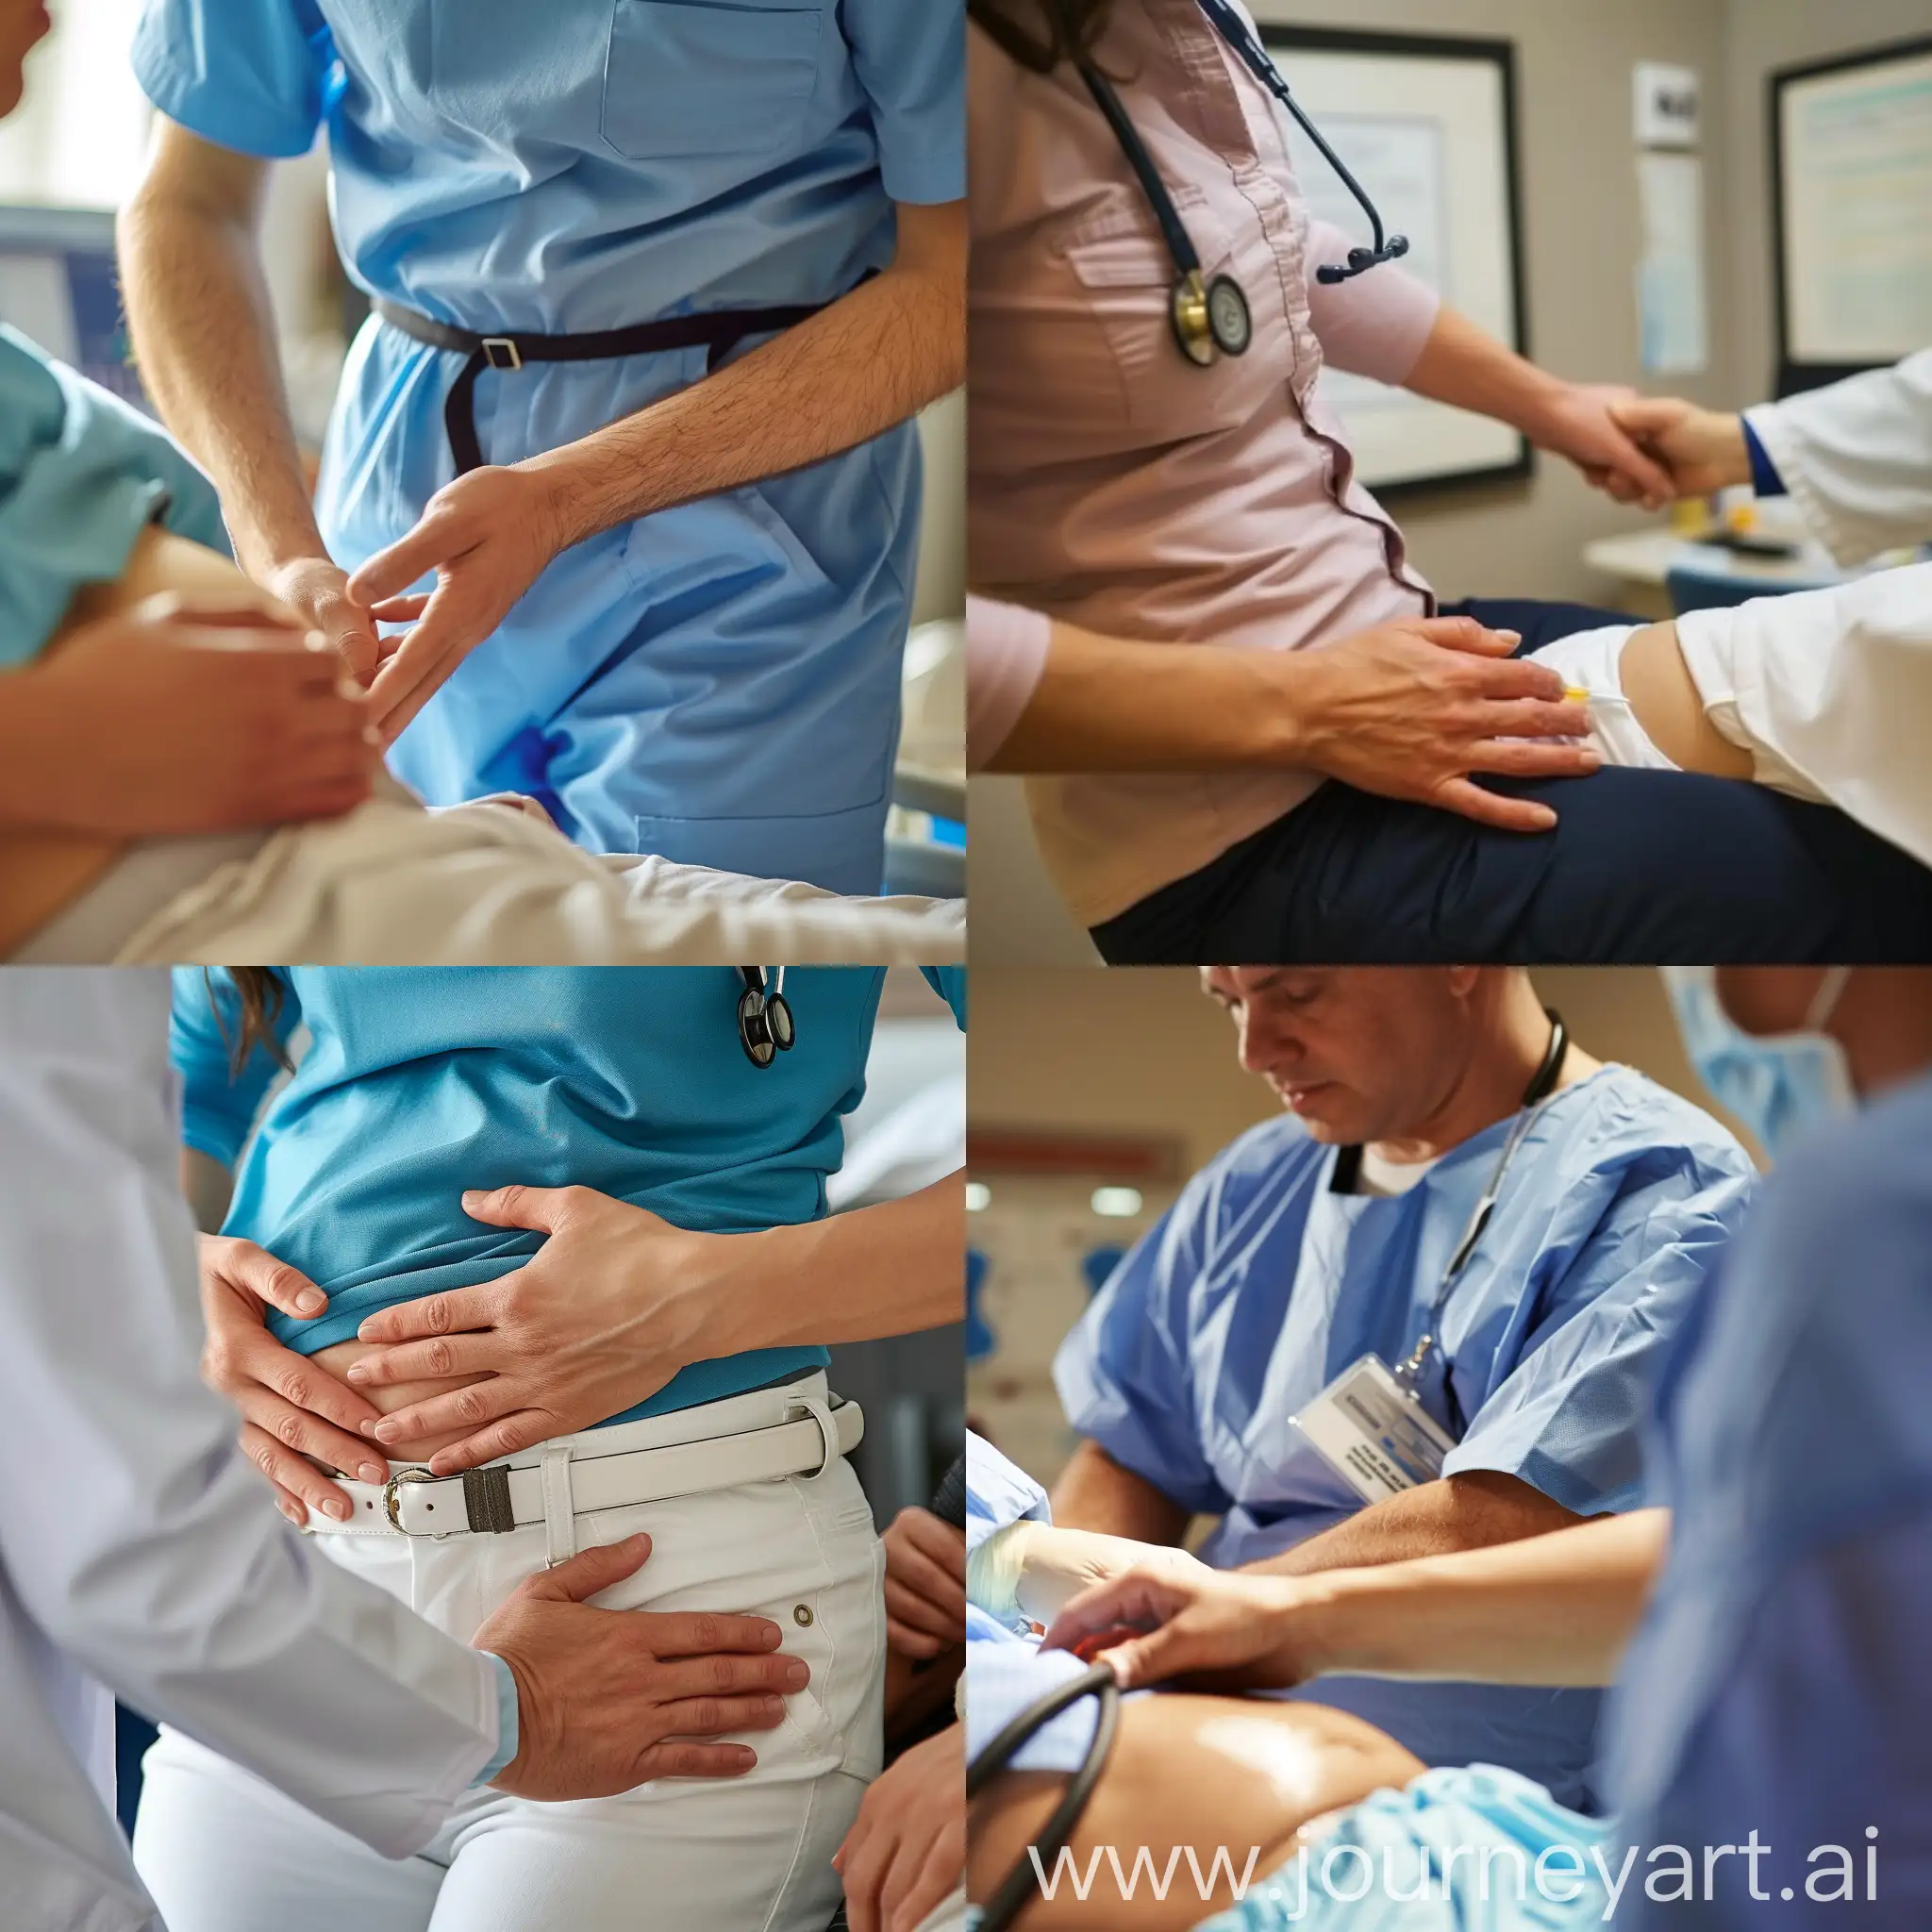 abdominal palpation by a medic during the examination of a patient, POV